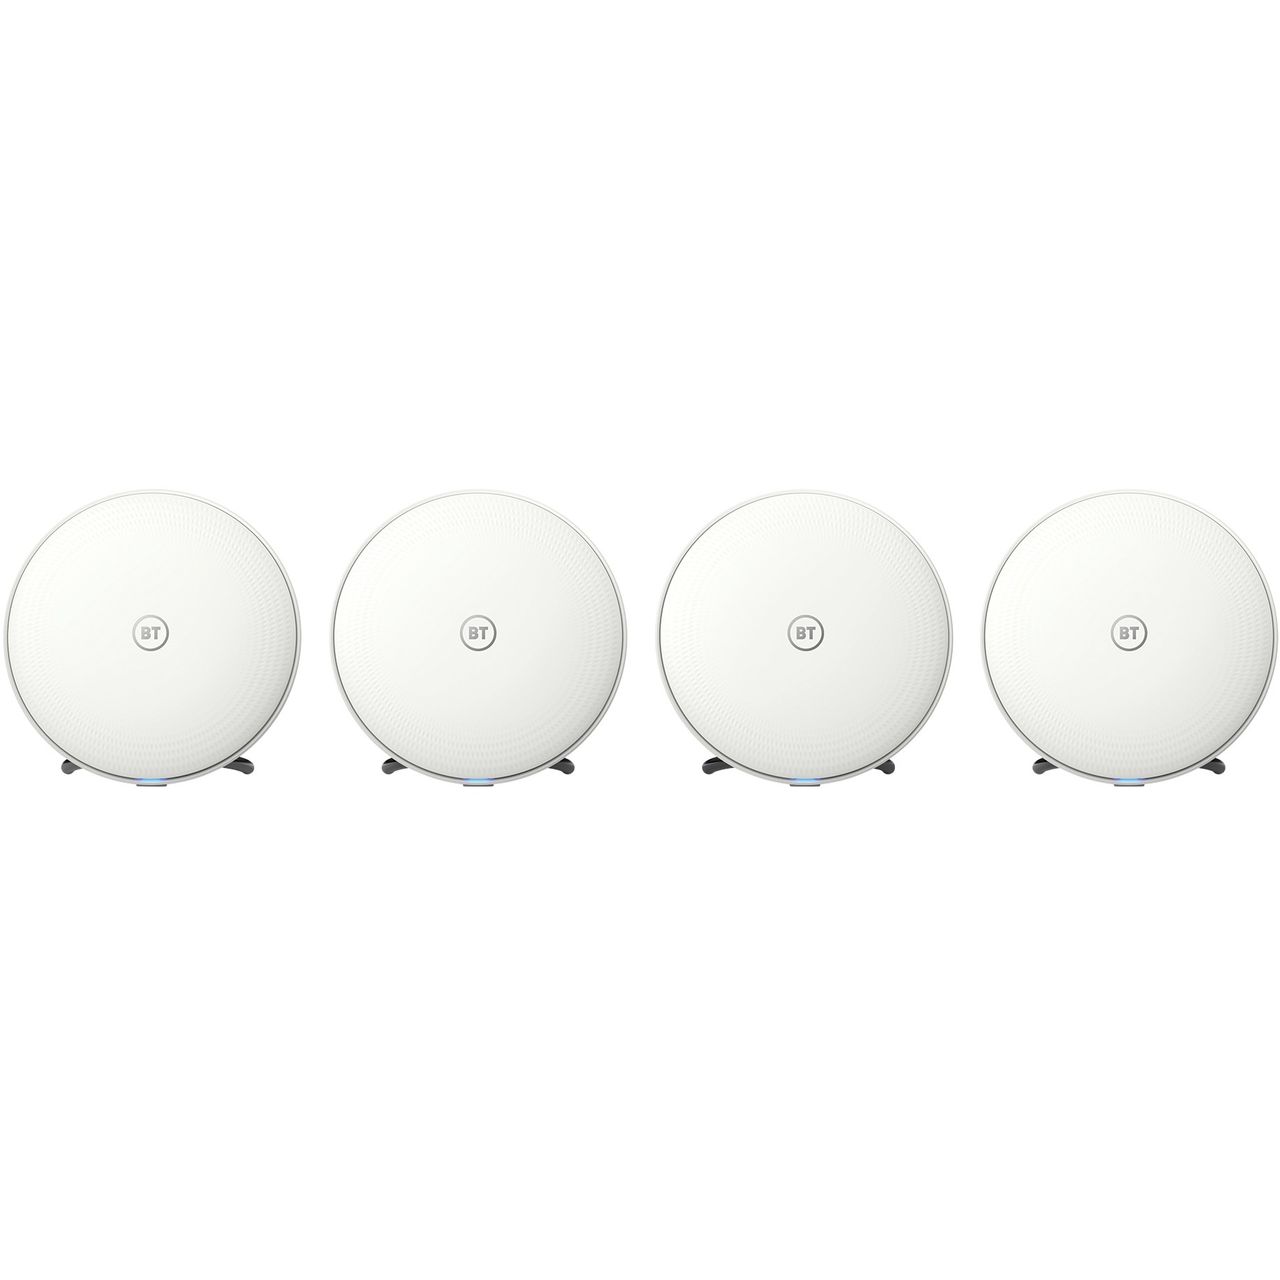 BT Premium Whole Home WiFi (4-Pack) for Mesh Network Review